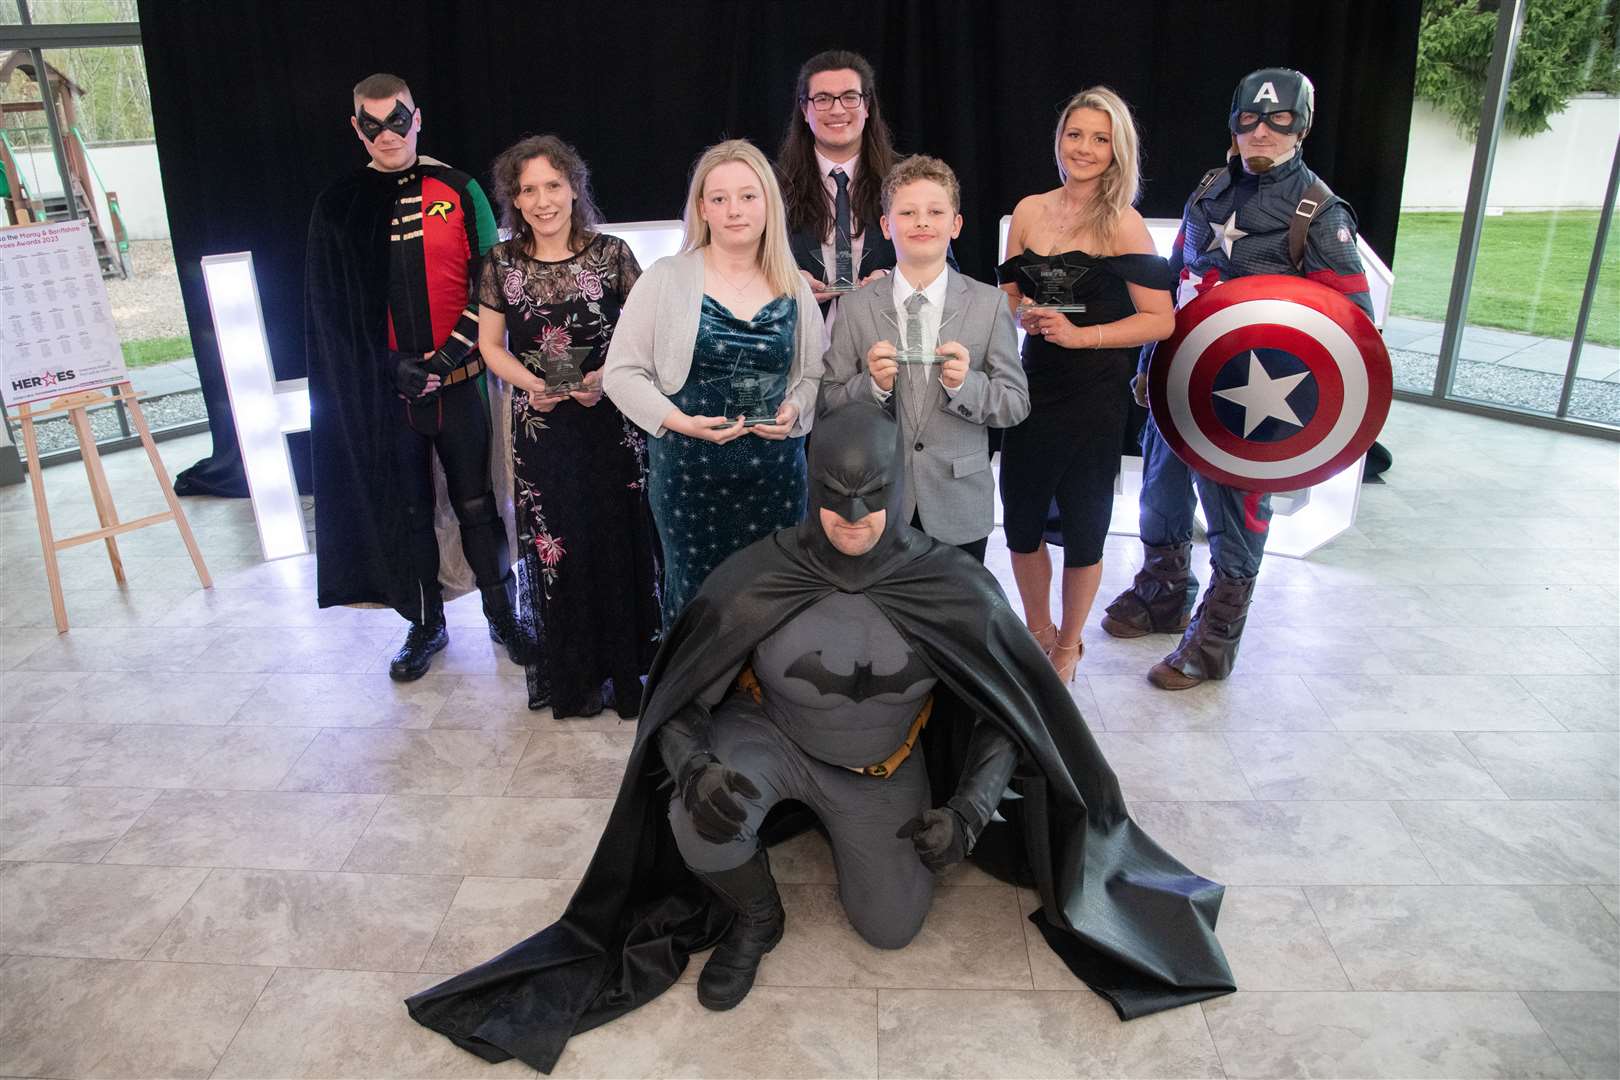 Award winners with the superheroes. Picture: Daniel Forsyth